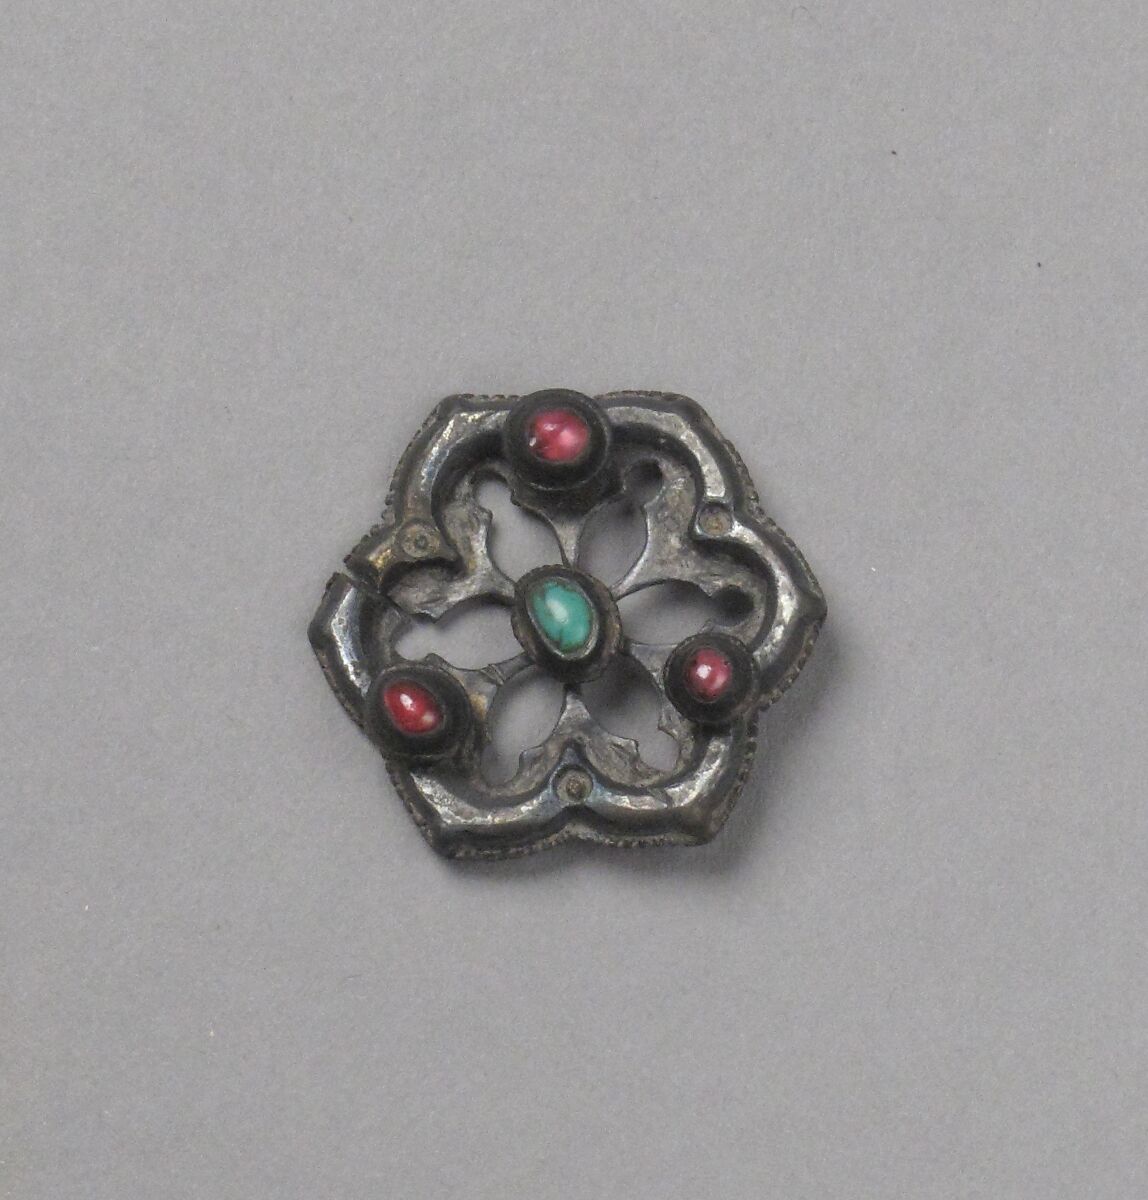 Ring Brooch, Silver, turquoise, glass paste, Western European 